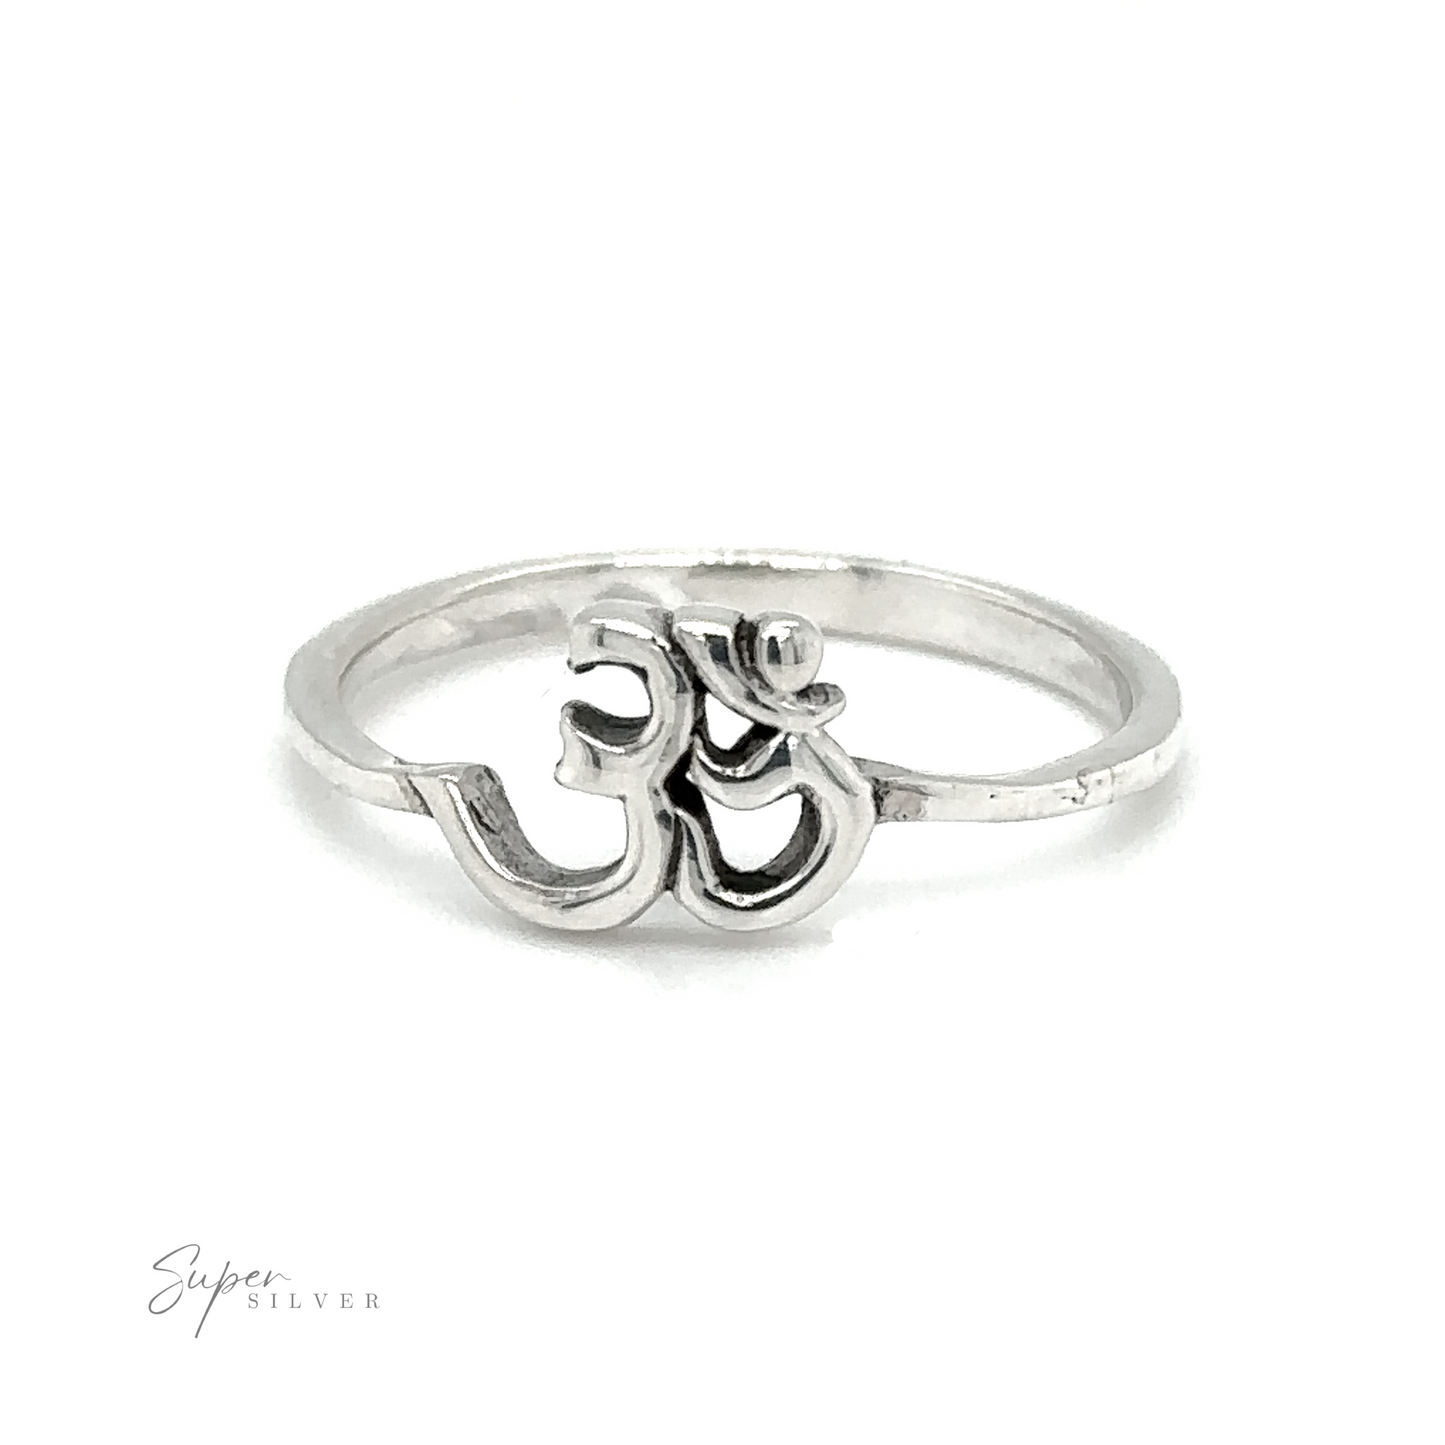 A Dainty Om ring with a symbol representing interconnectedness and mindfulness.